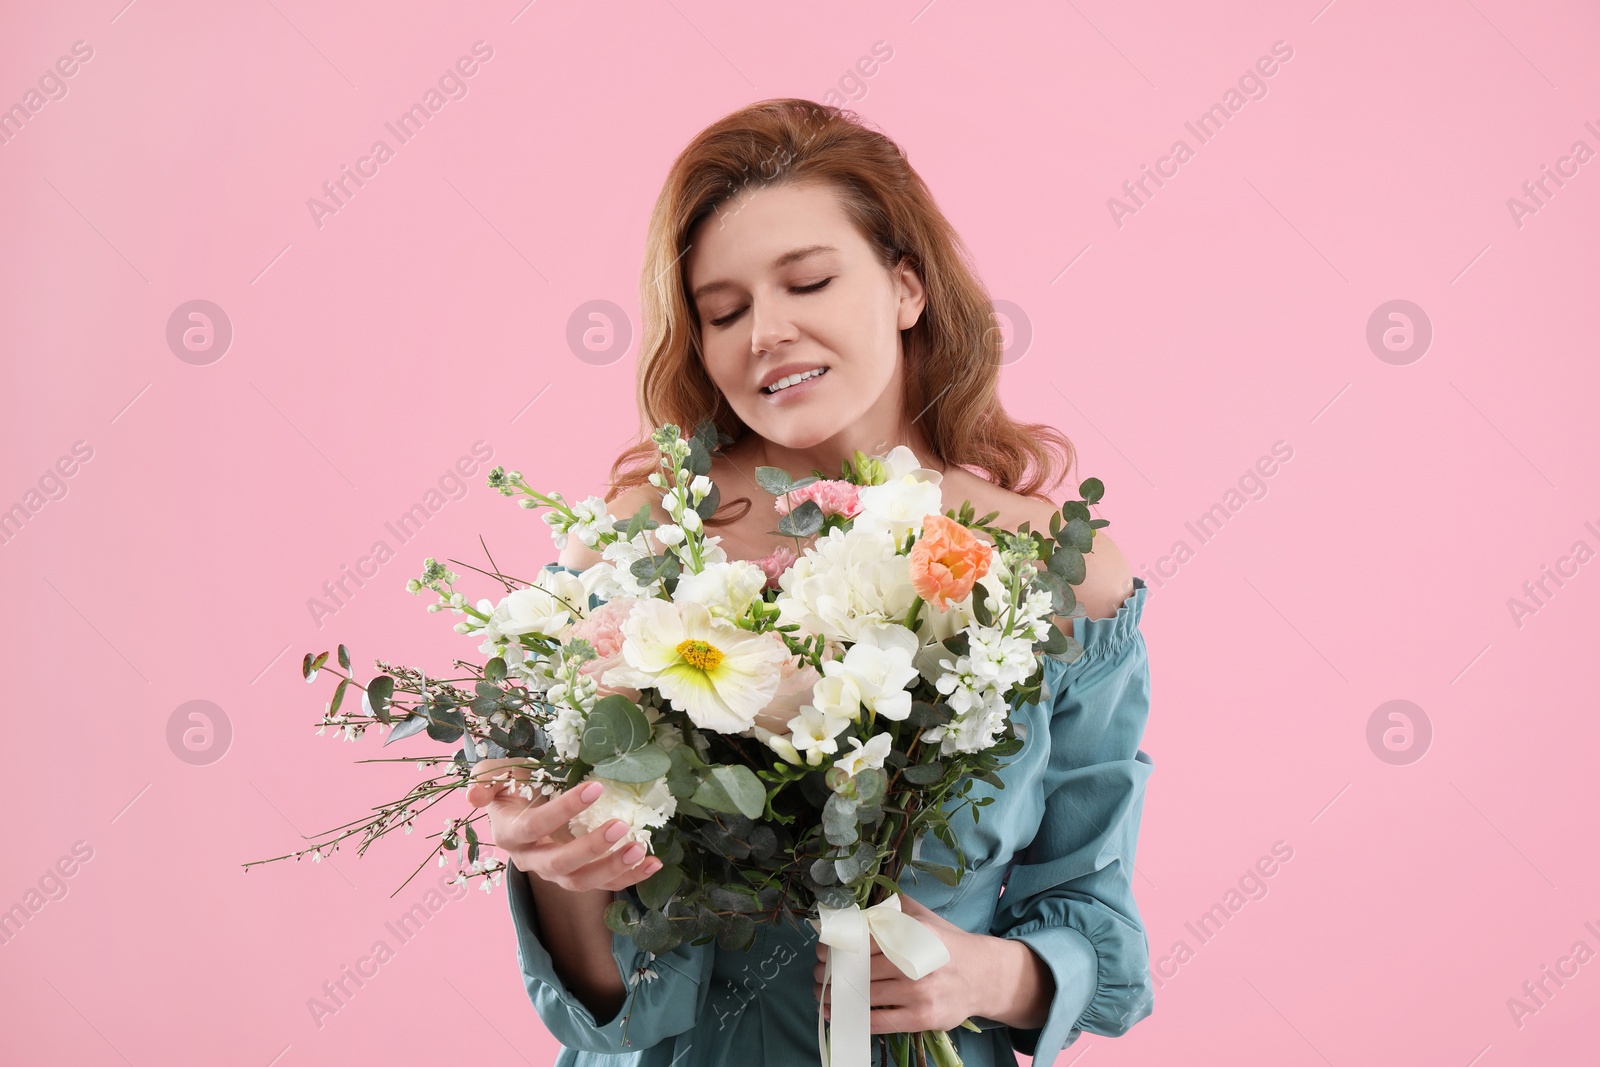 Photo of Beautiful woman with bouquet of flowers on pink background